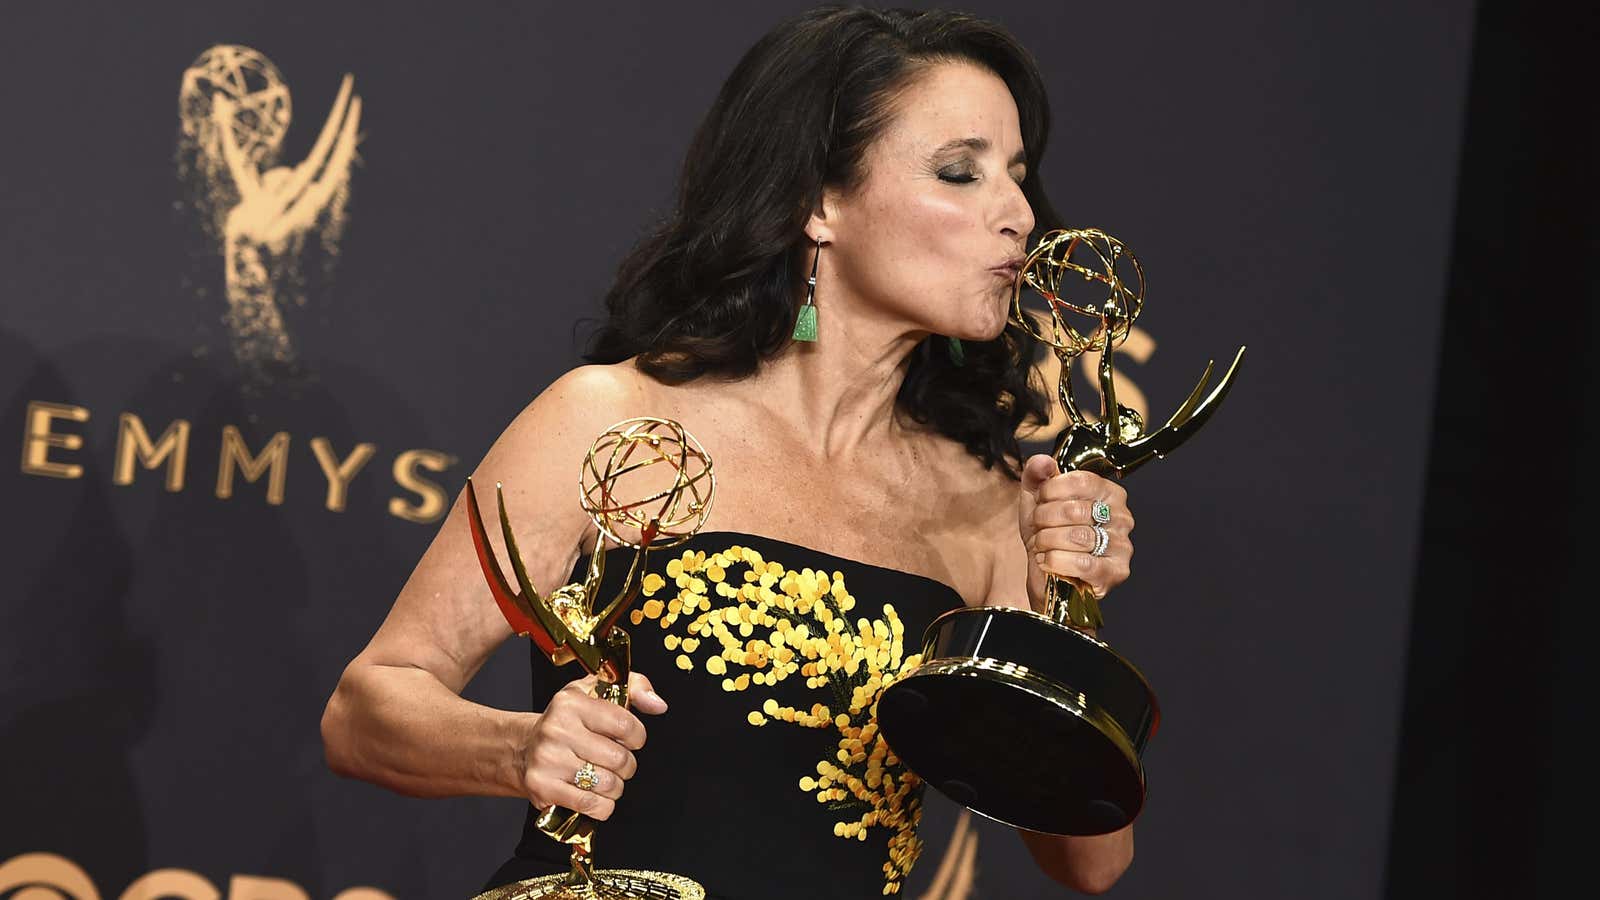 Julia Louis-Dreyfus has won more Emmys than any other actor in history.